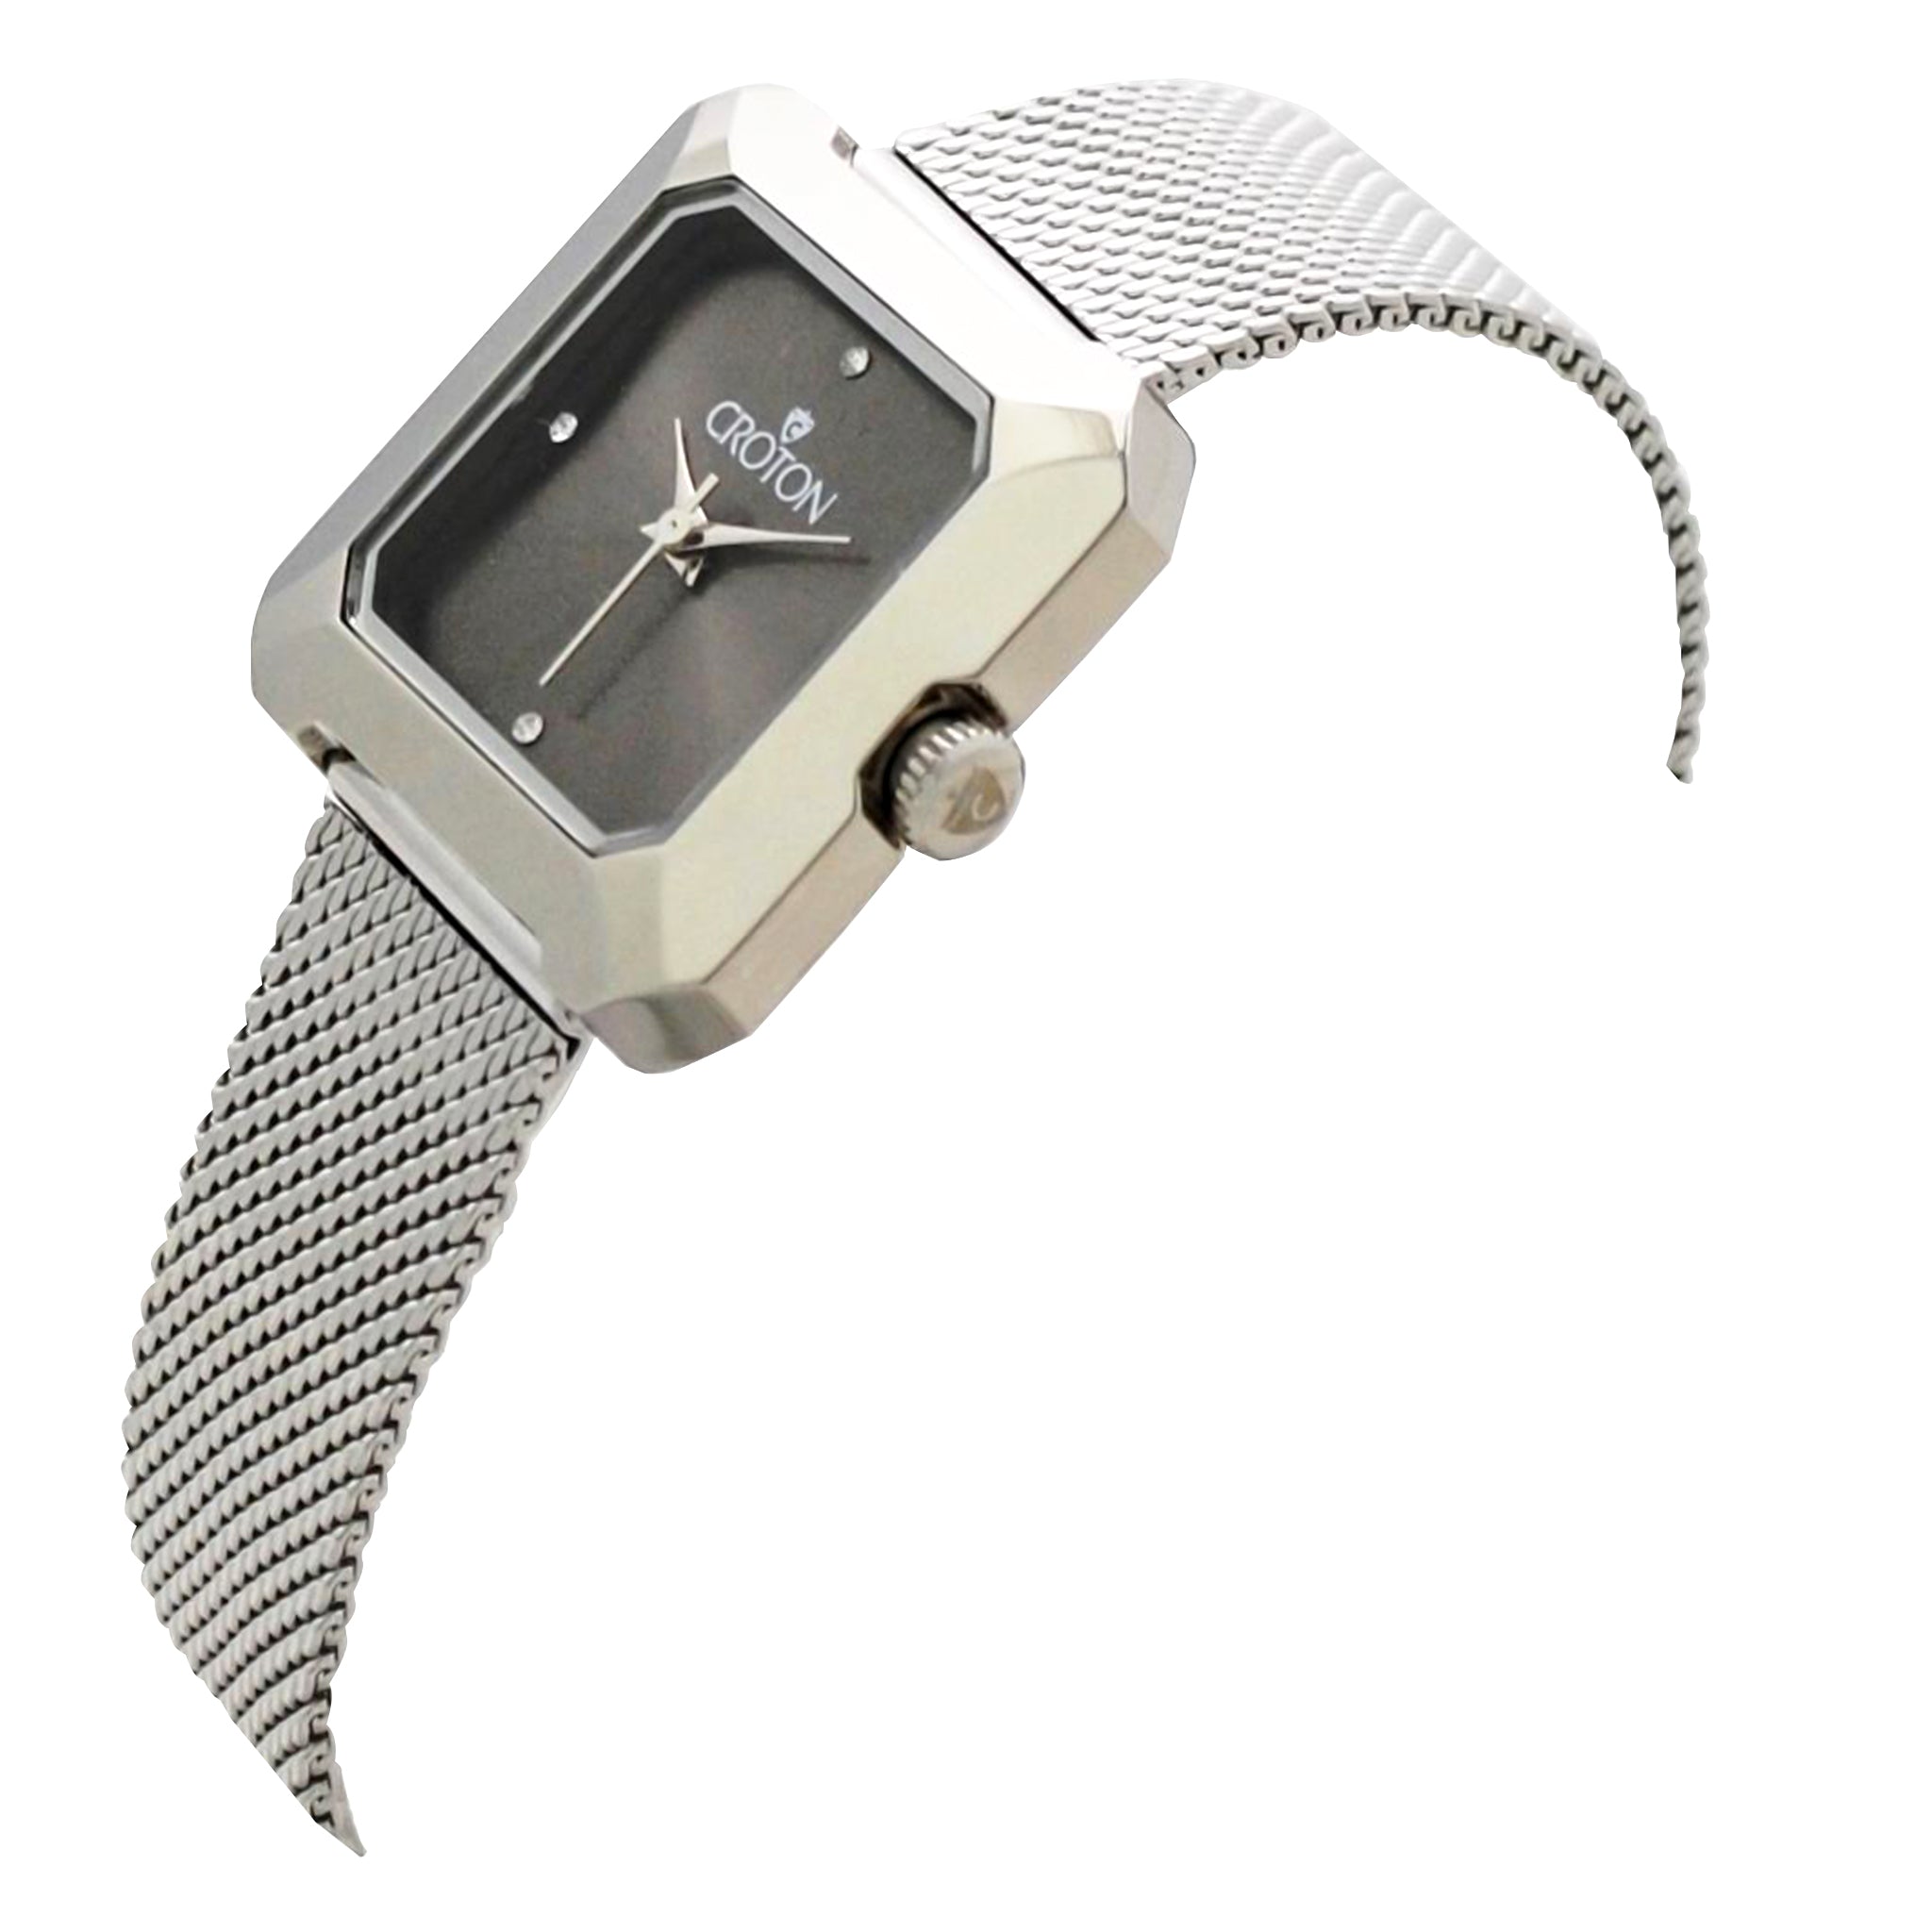 Ladies All Stainless Steel Silvertone Mesh Bracelet Watch with Gray Dial